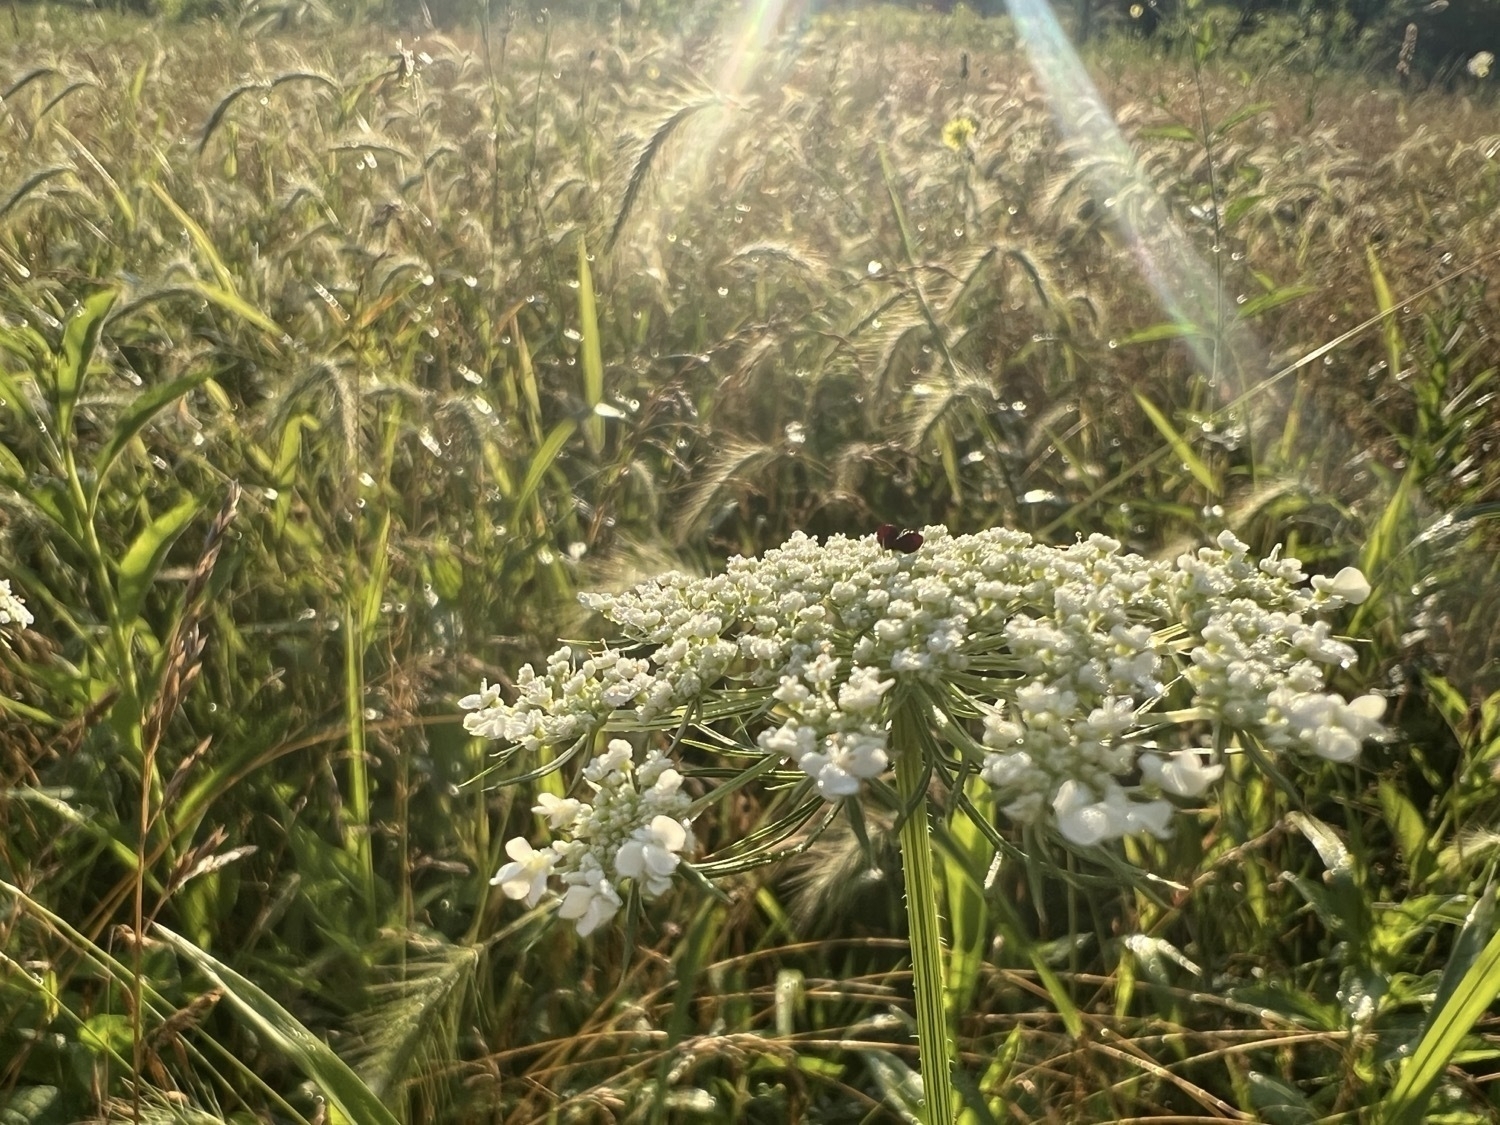 A complicated photo of a flower and golden grassy foliage. Rays of sunlight fall from the top of the photo onto a cluster of tiny white flowers with an underside of green stems that form a bowl. The flowers are set against a field of mostly gold colored grasses topped with green seed heads covered in fine hairs covered in dew.